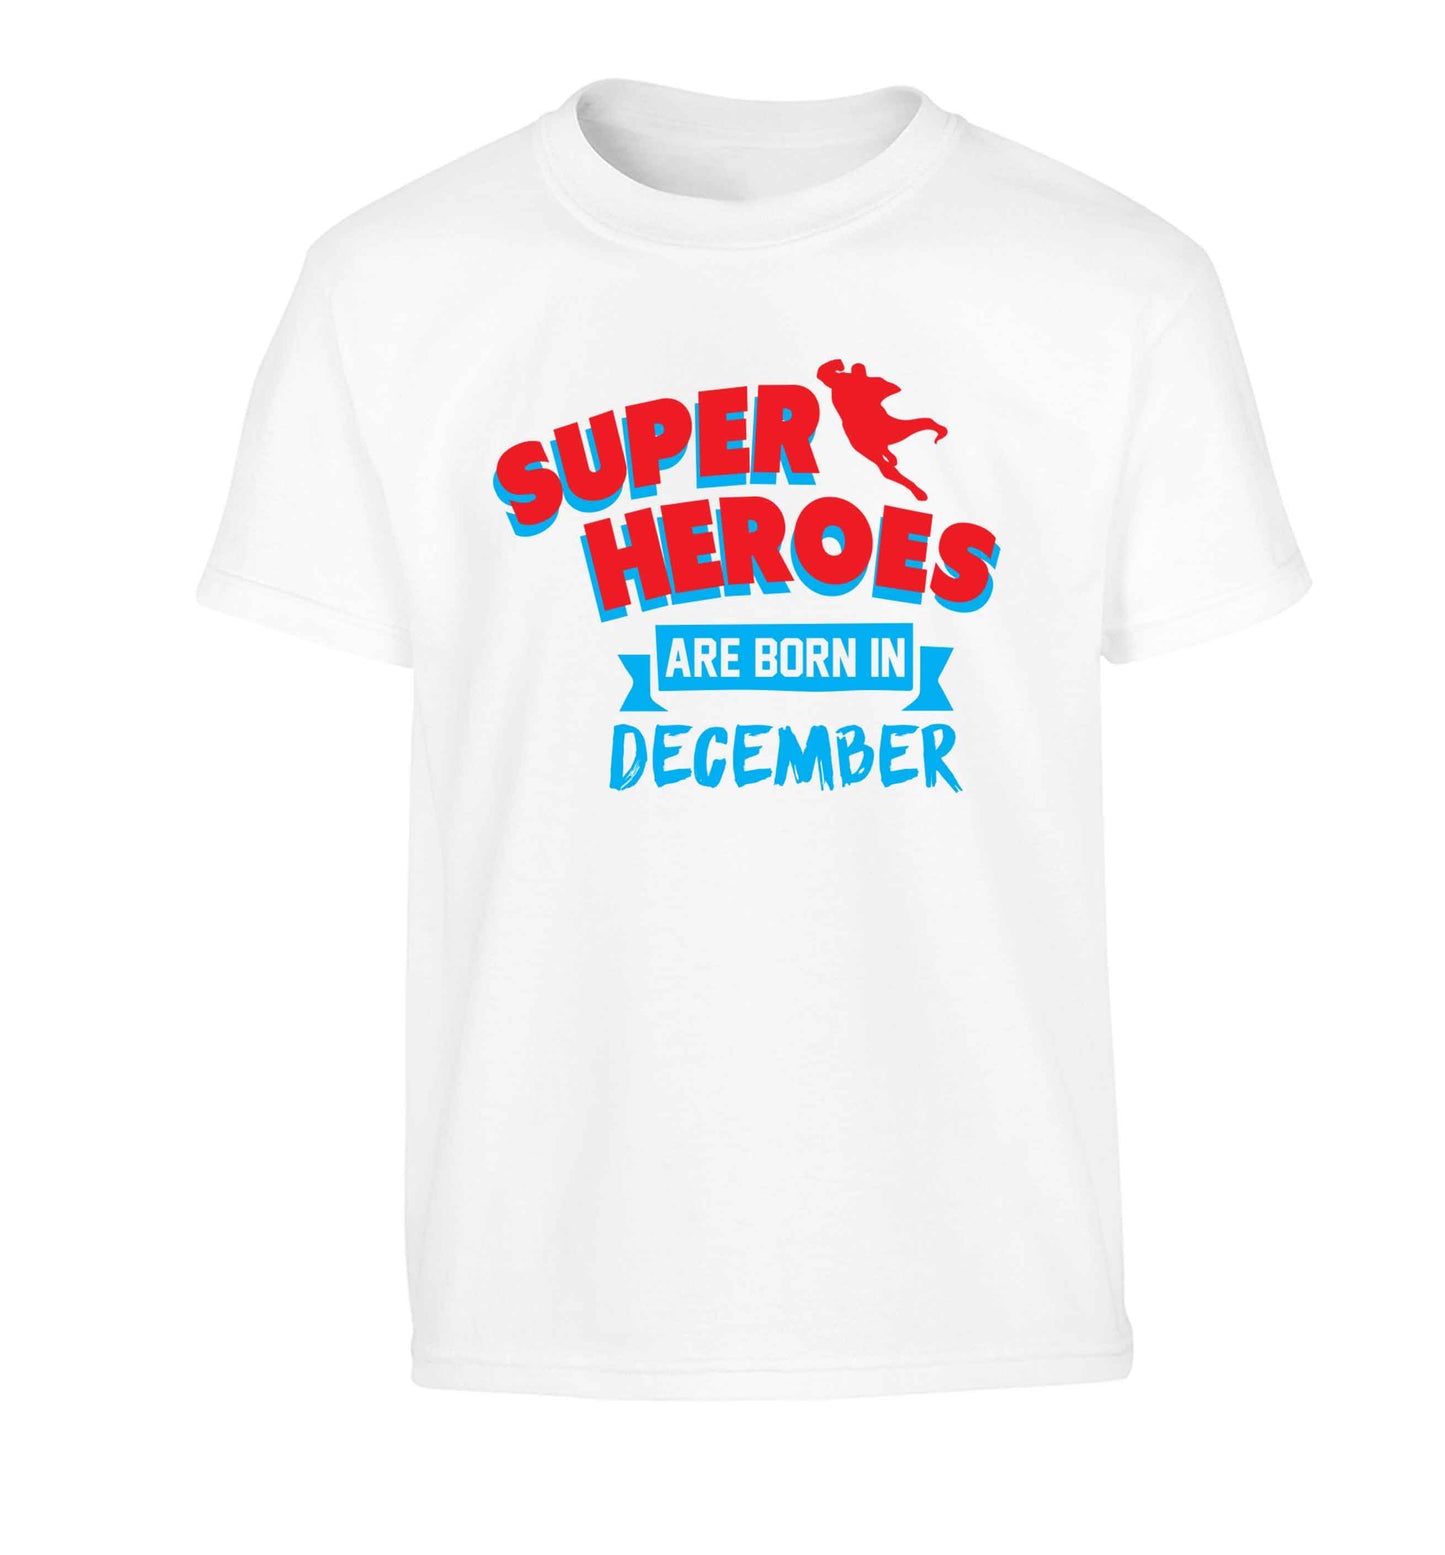 Superheroes are born in December Children's white Tshirt 12-13 Years